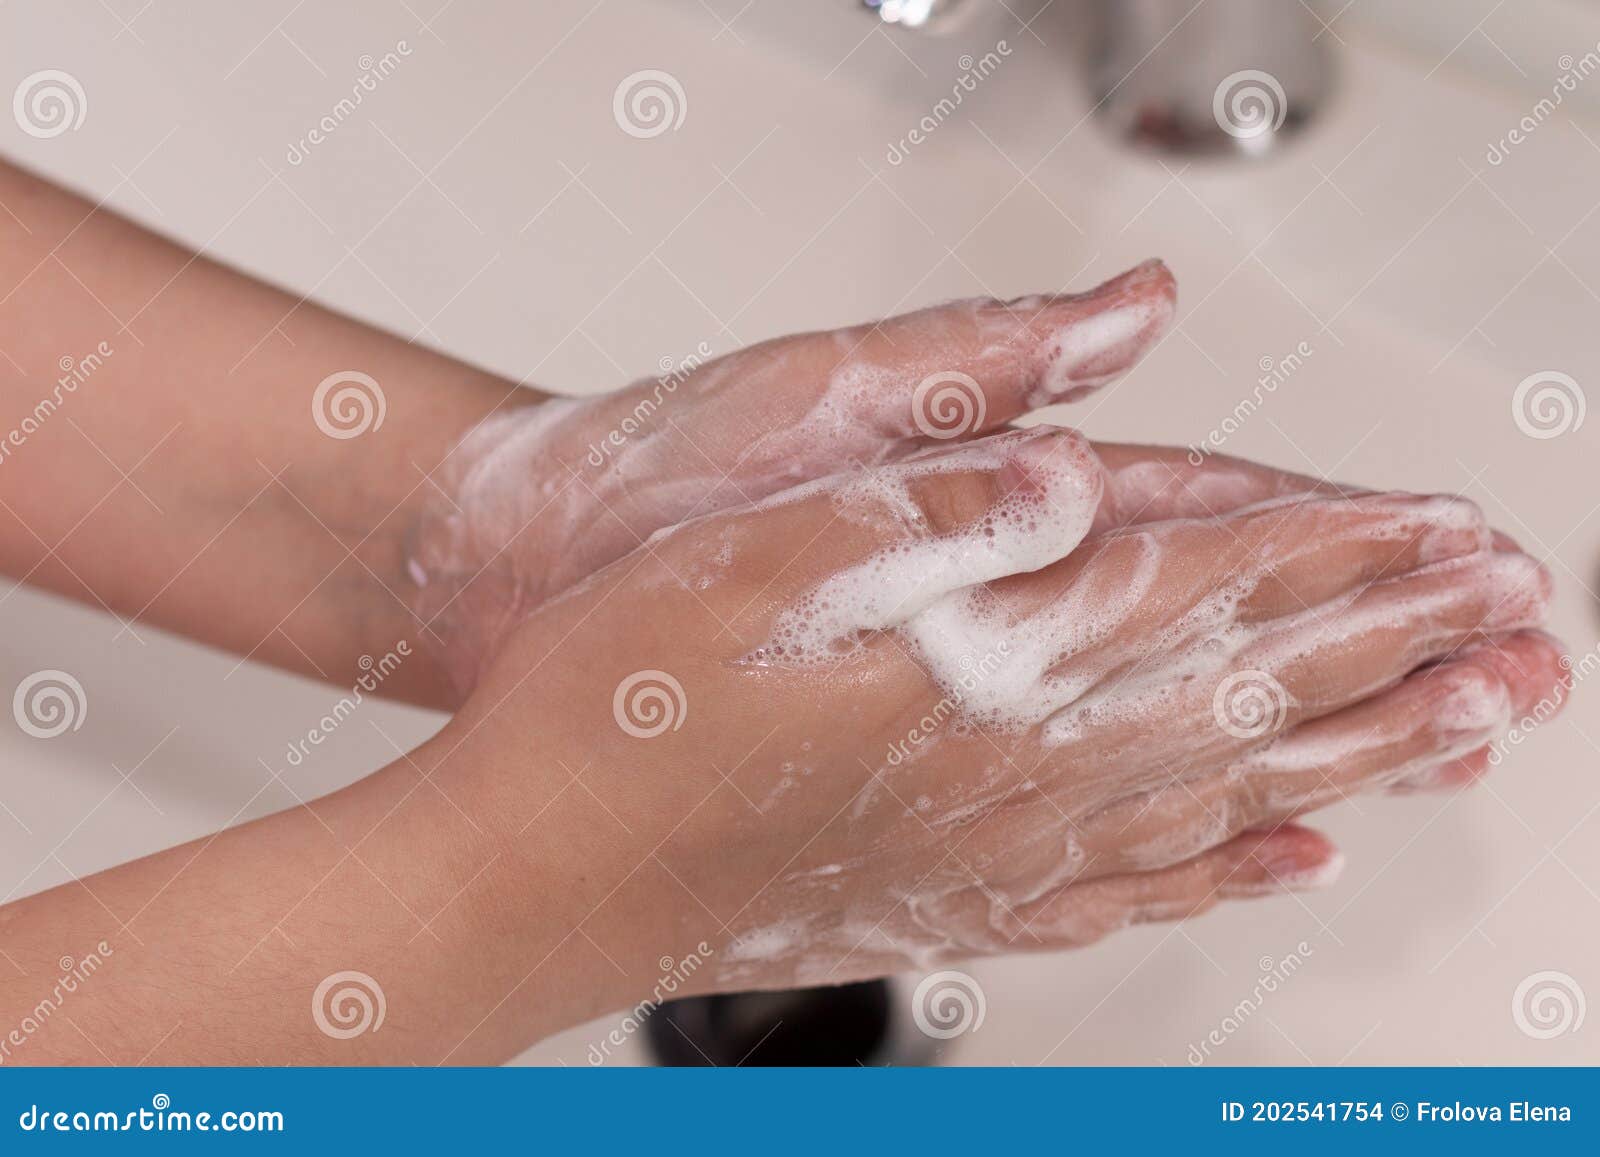 washing hands with soap foam